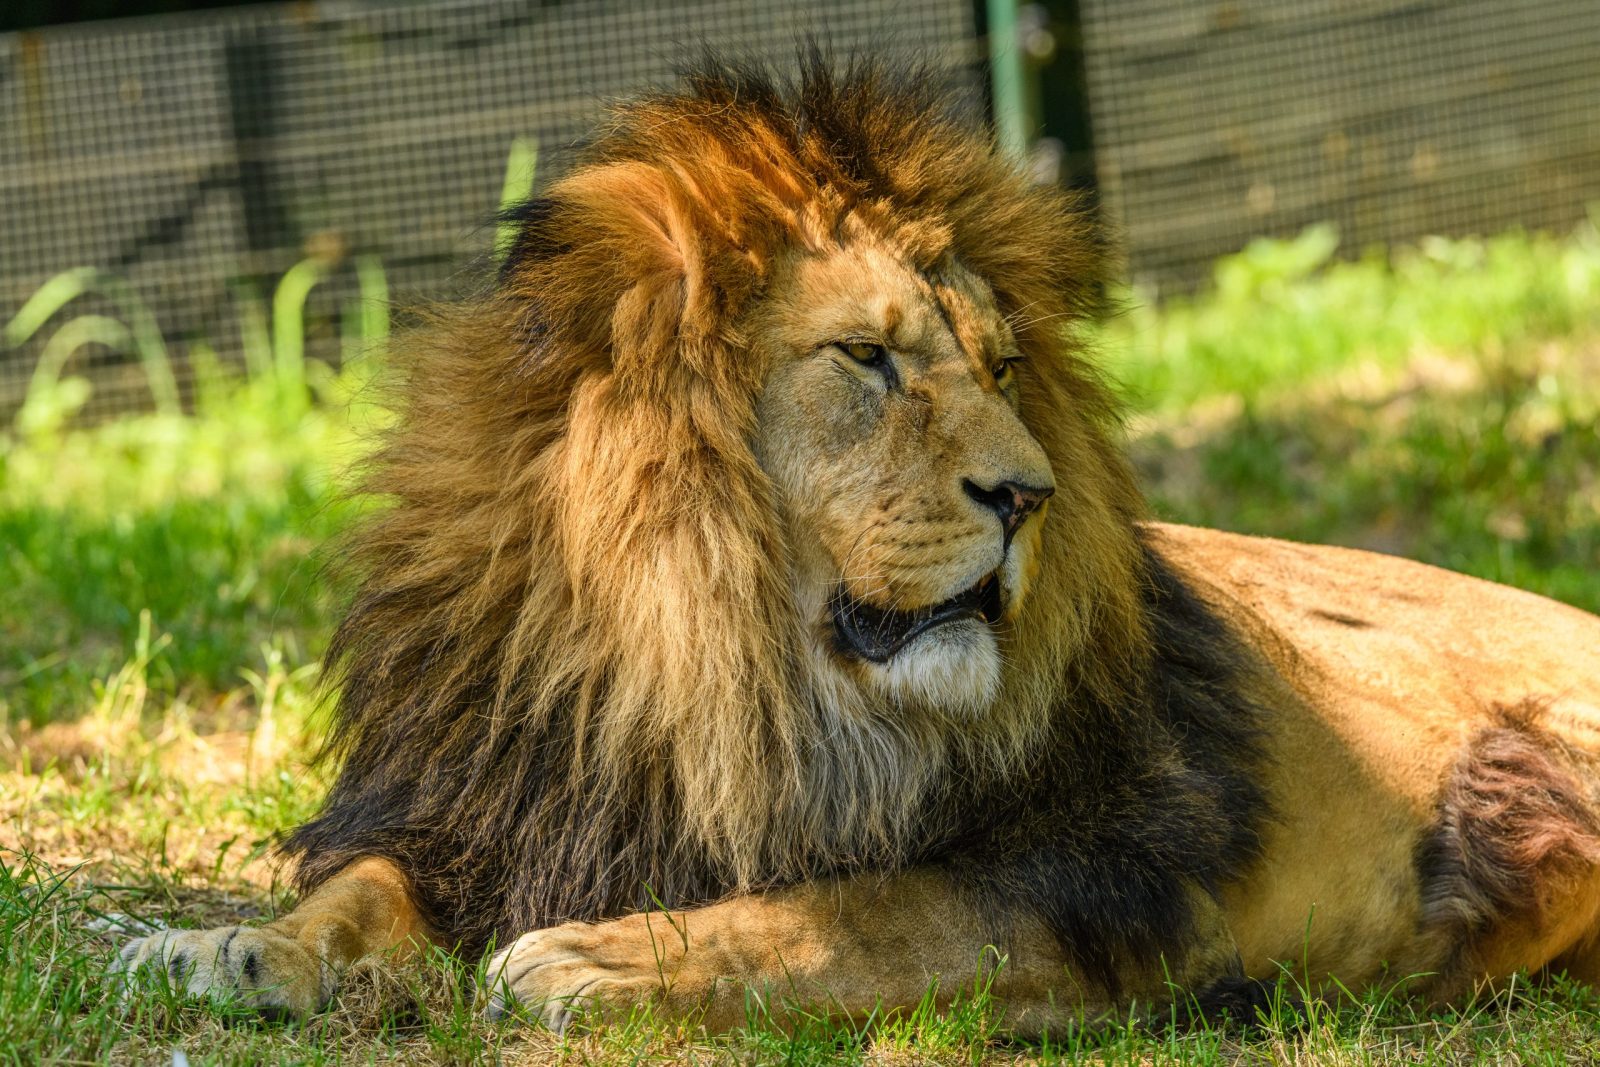 shutterstock_1891952080-scaled-e1669148209953.jpgfit16002C1067ssl1 Protect Remaining Lions in Ukraine, Enforce Animal Protection and Animal Testing Laws Properly in UK, and Ban Dangerous Weed Killer Paraquat: 10 Petitions to Sign this Week to Help People, Animals, and the Planet